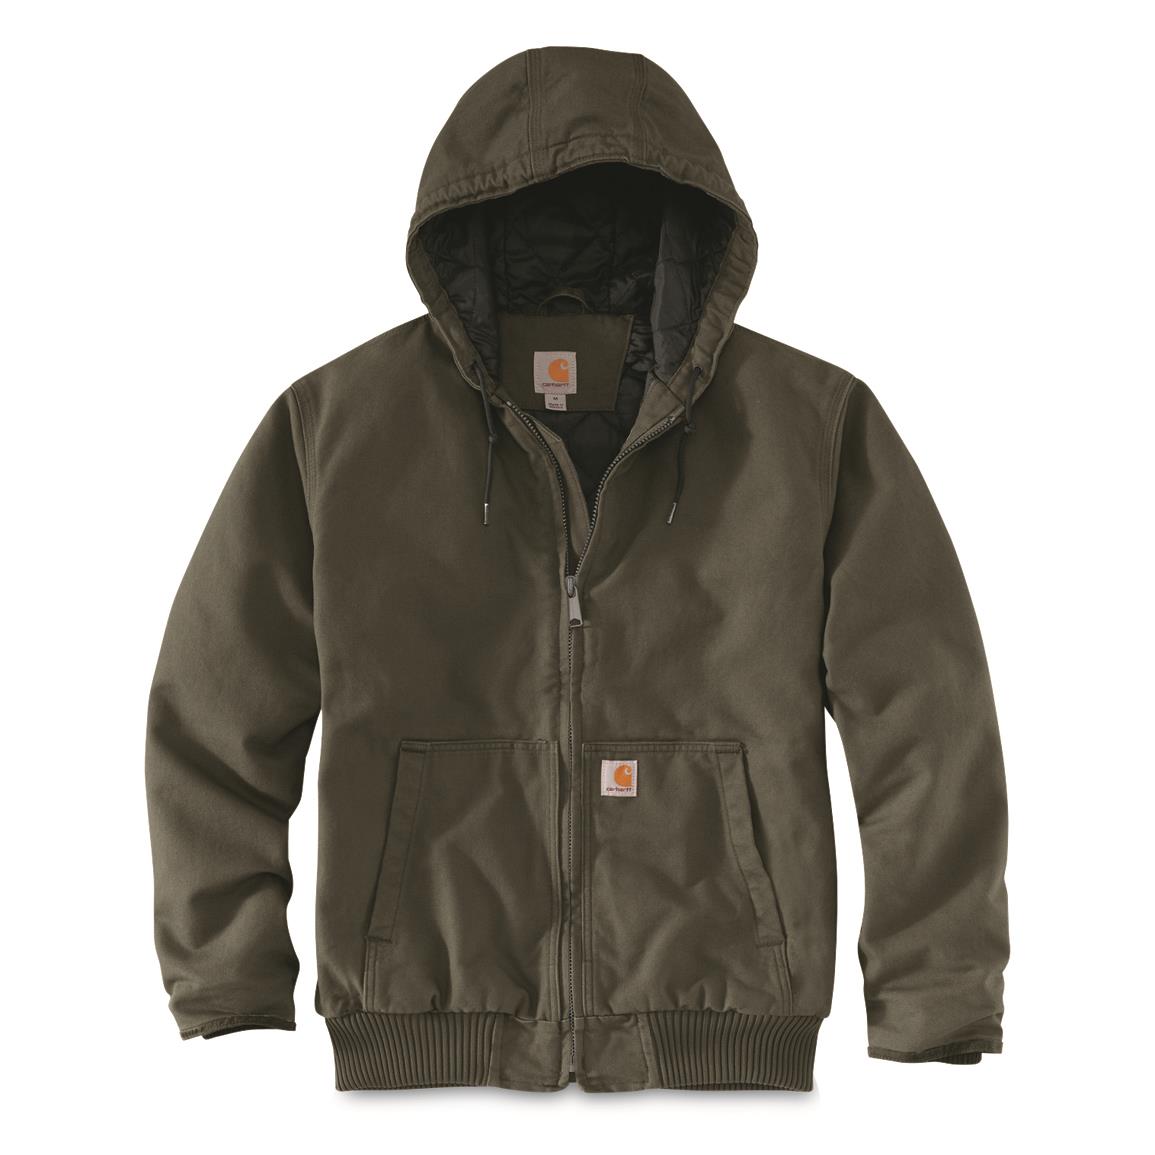 Carhartt Men's Washed Duck Insulated Active Jacket, Moss